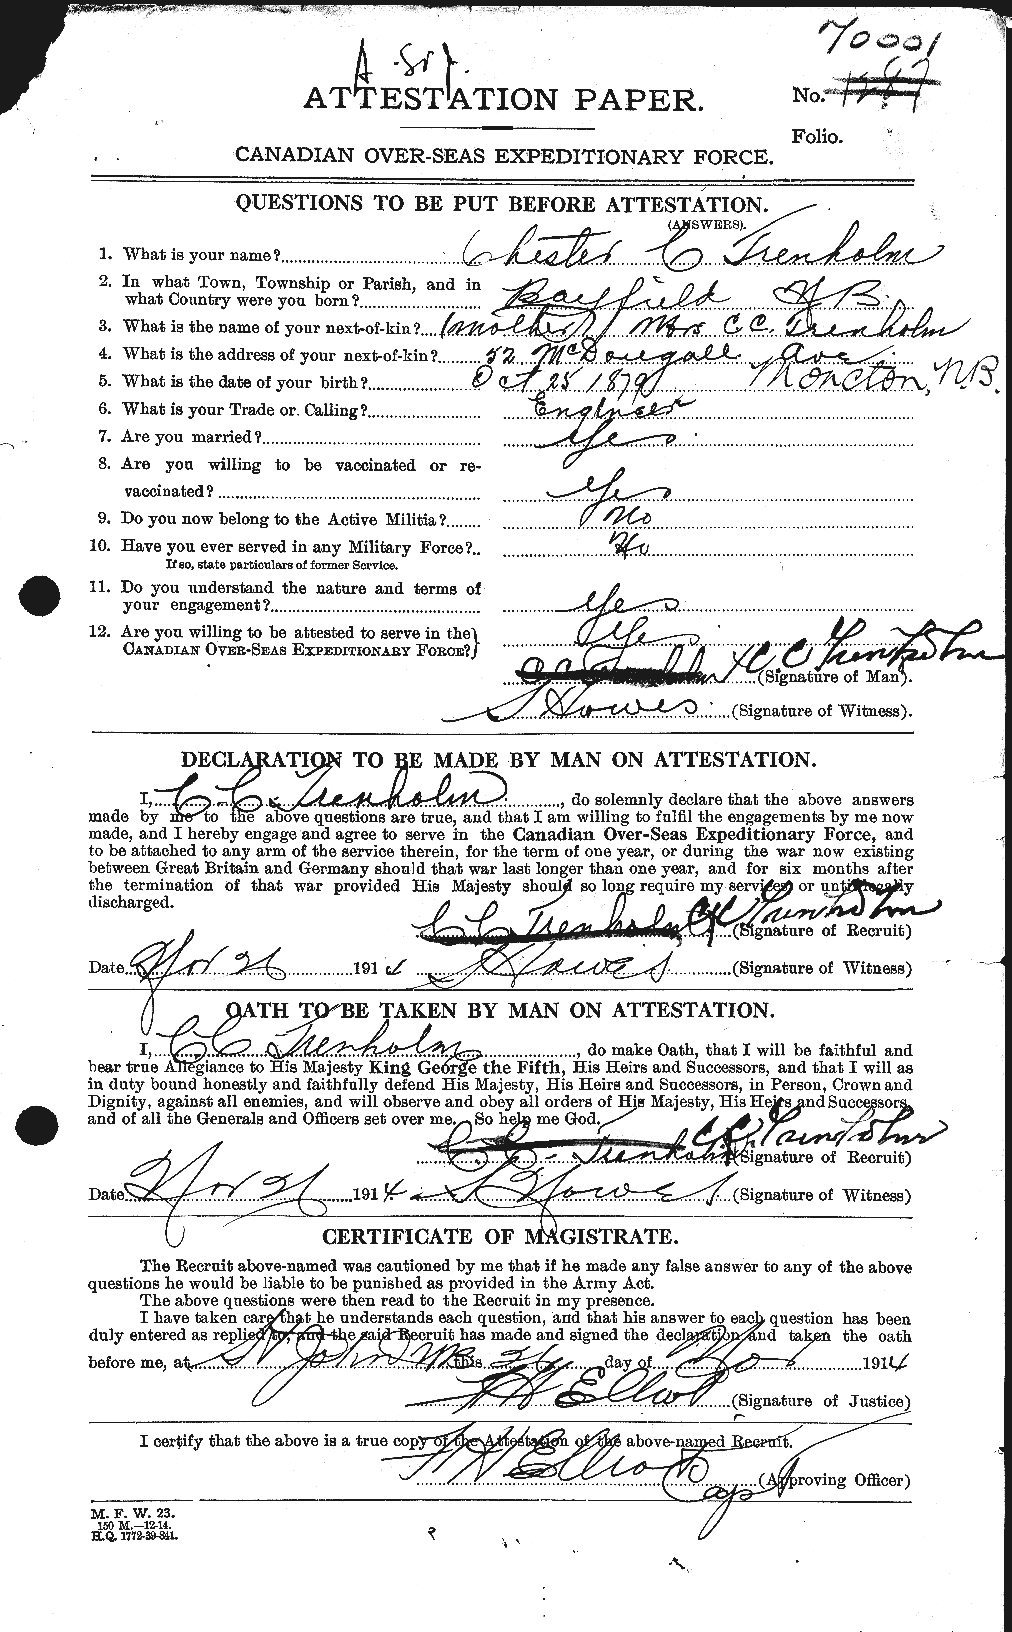 Personnel Records of the First World War - CEF 638452a